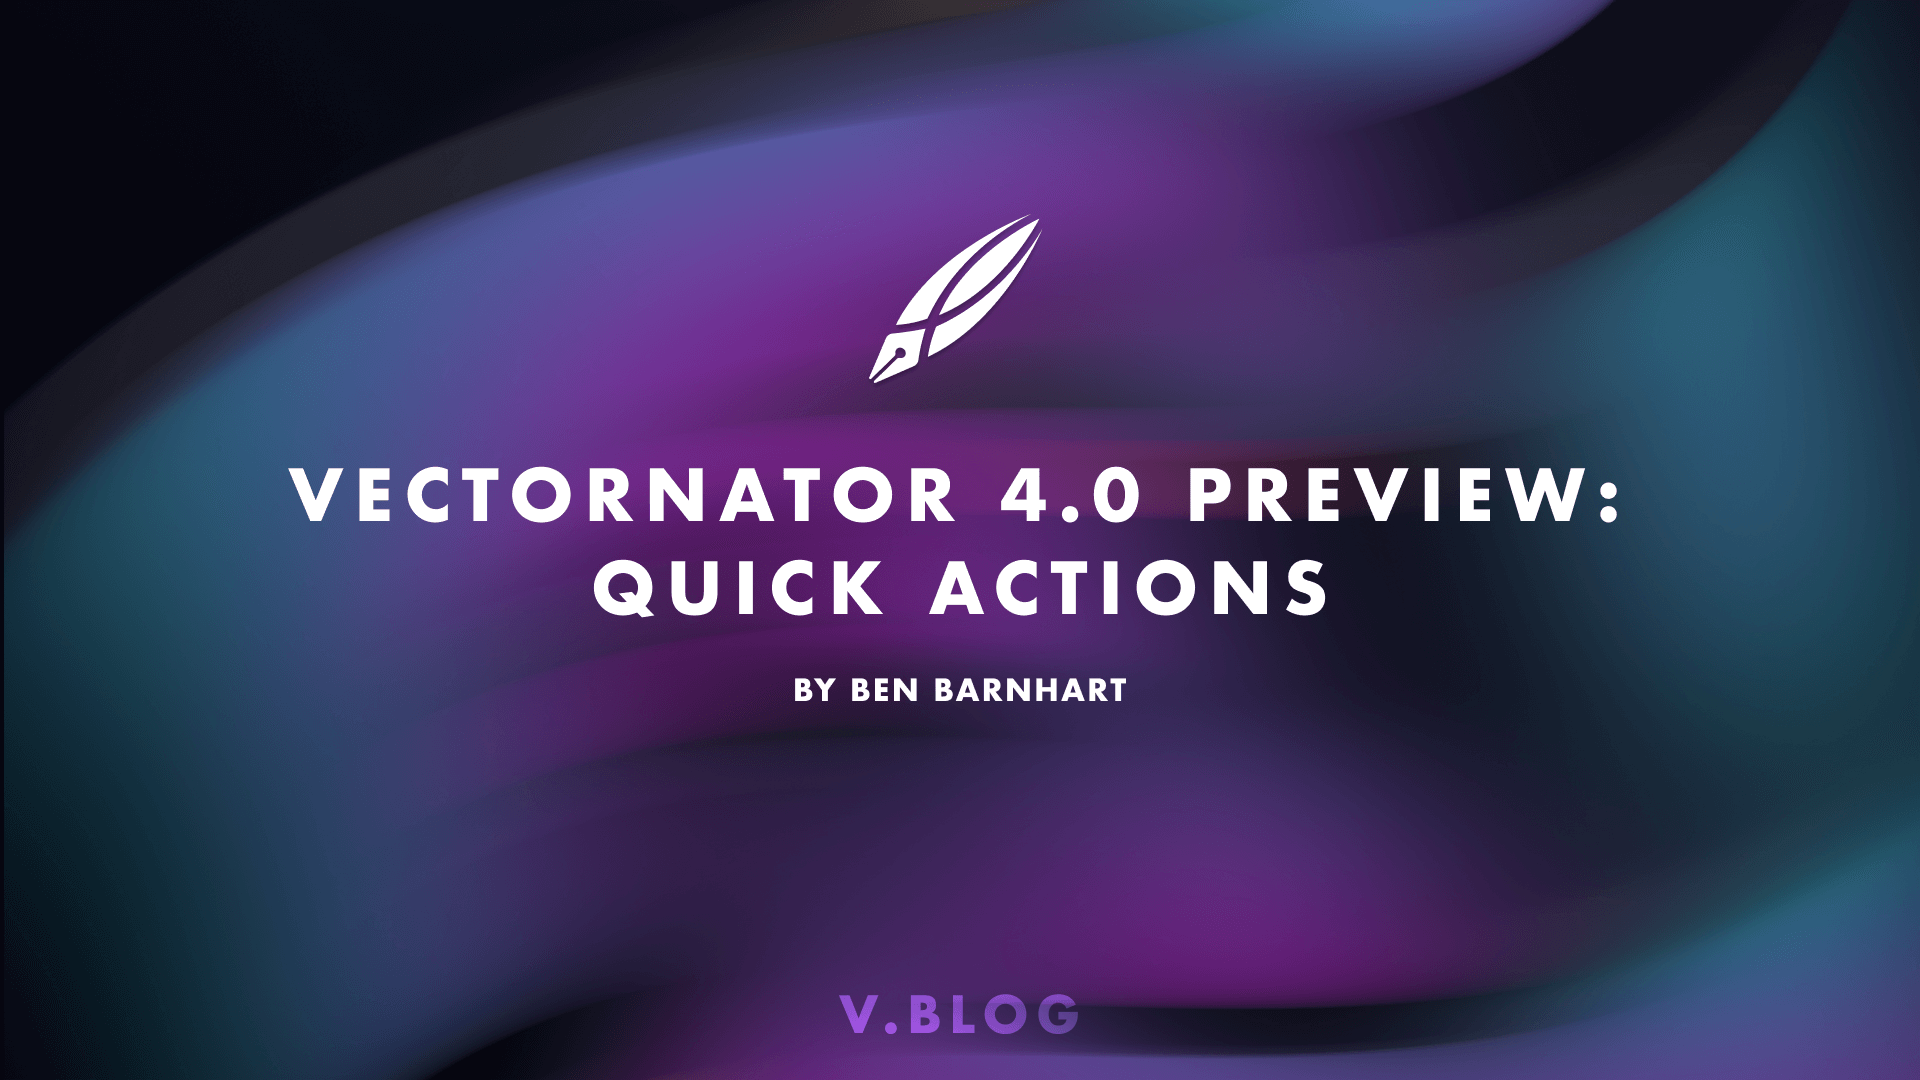 Vectornator 4.0 Preview: Quick Actions